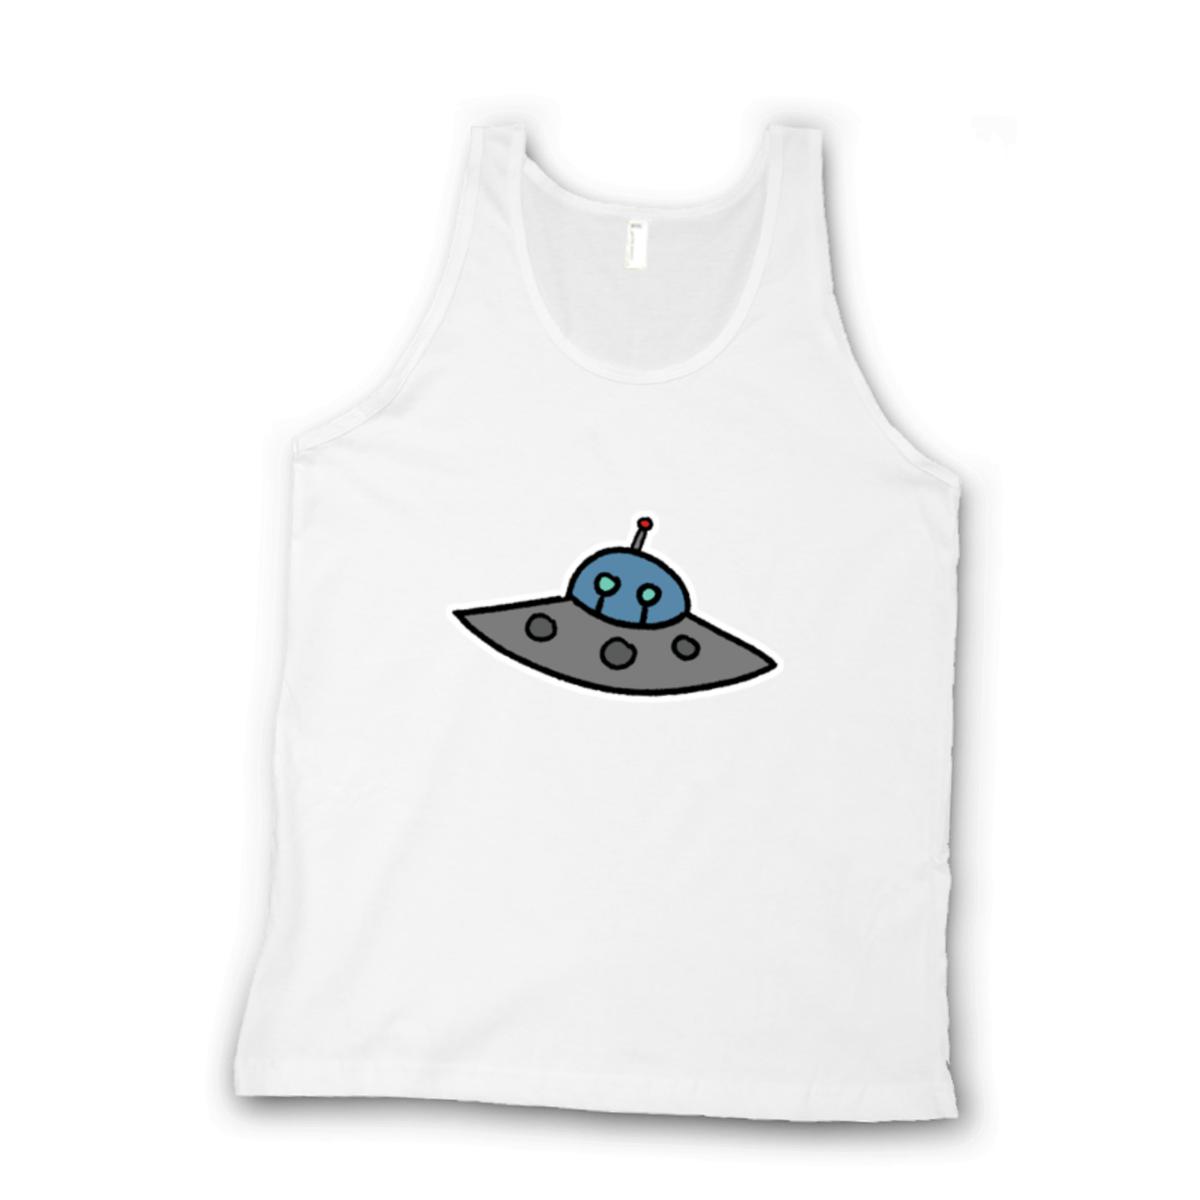 Flying Saucer Unisex Tank Top Small white